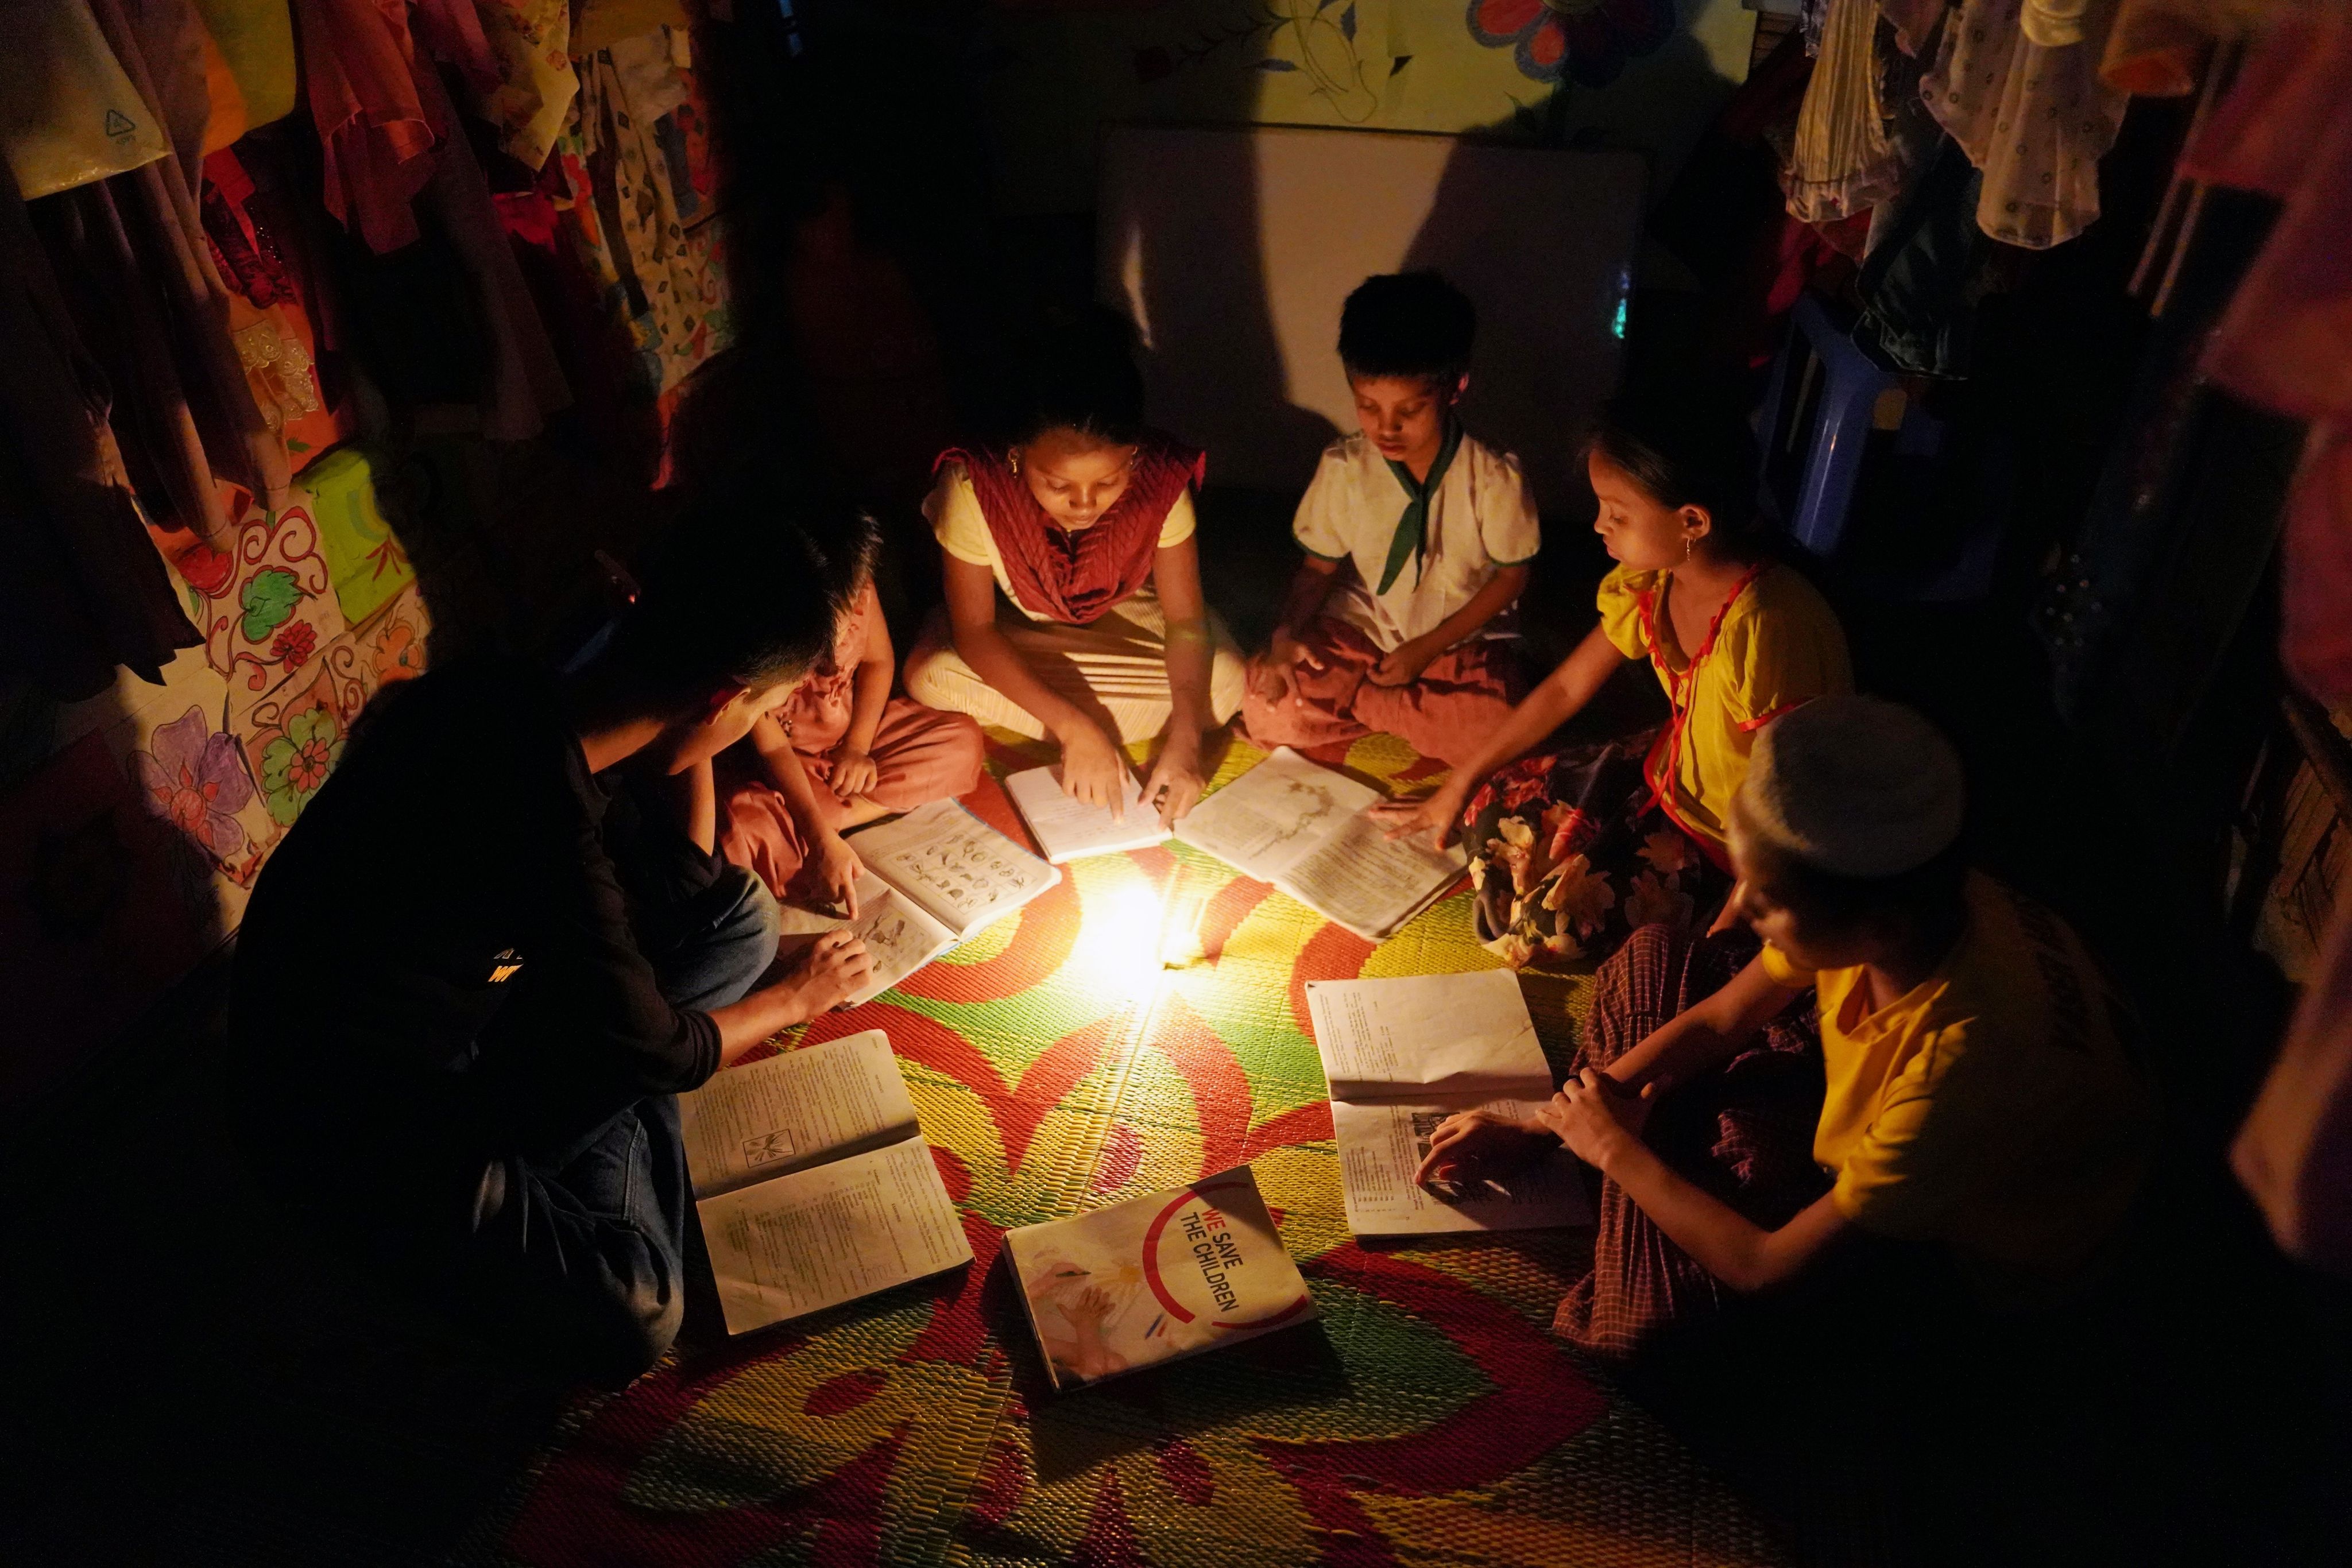 Ayaz*, 15, and his five younger siblings read by candle light in their house in Cox's Bazar, Bangladesh